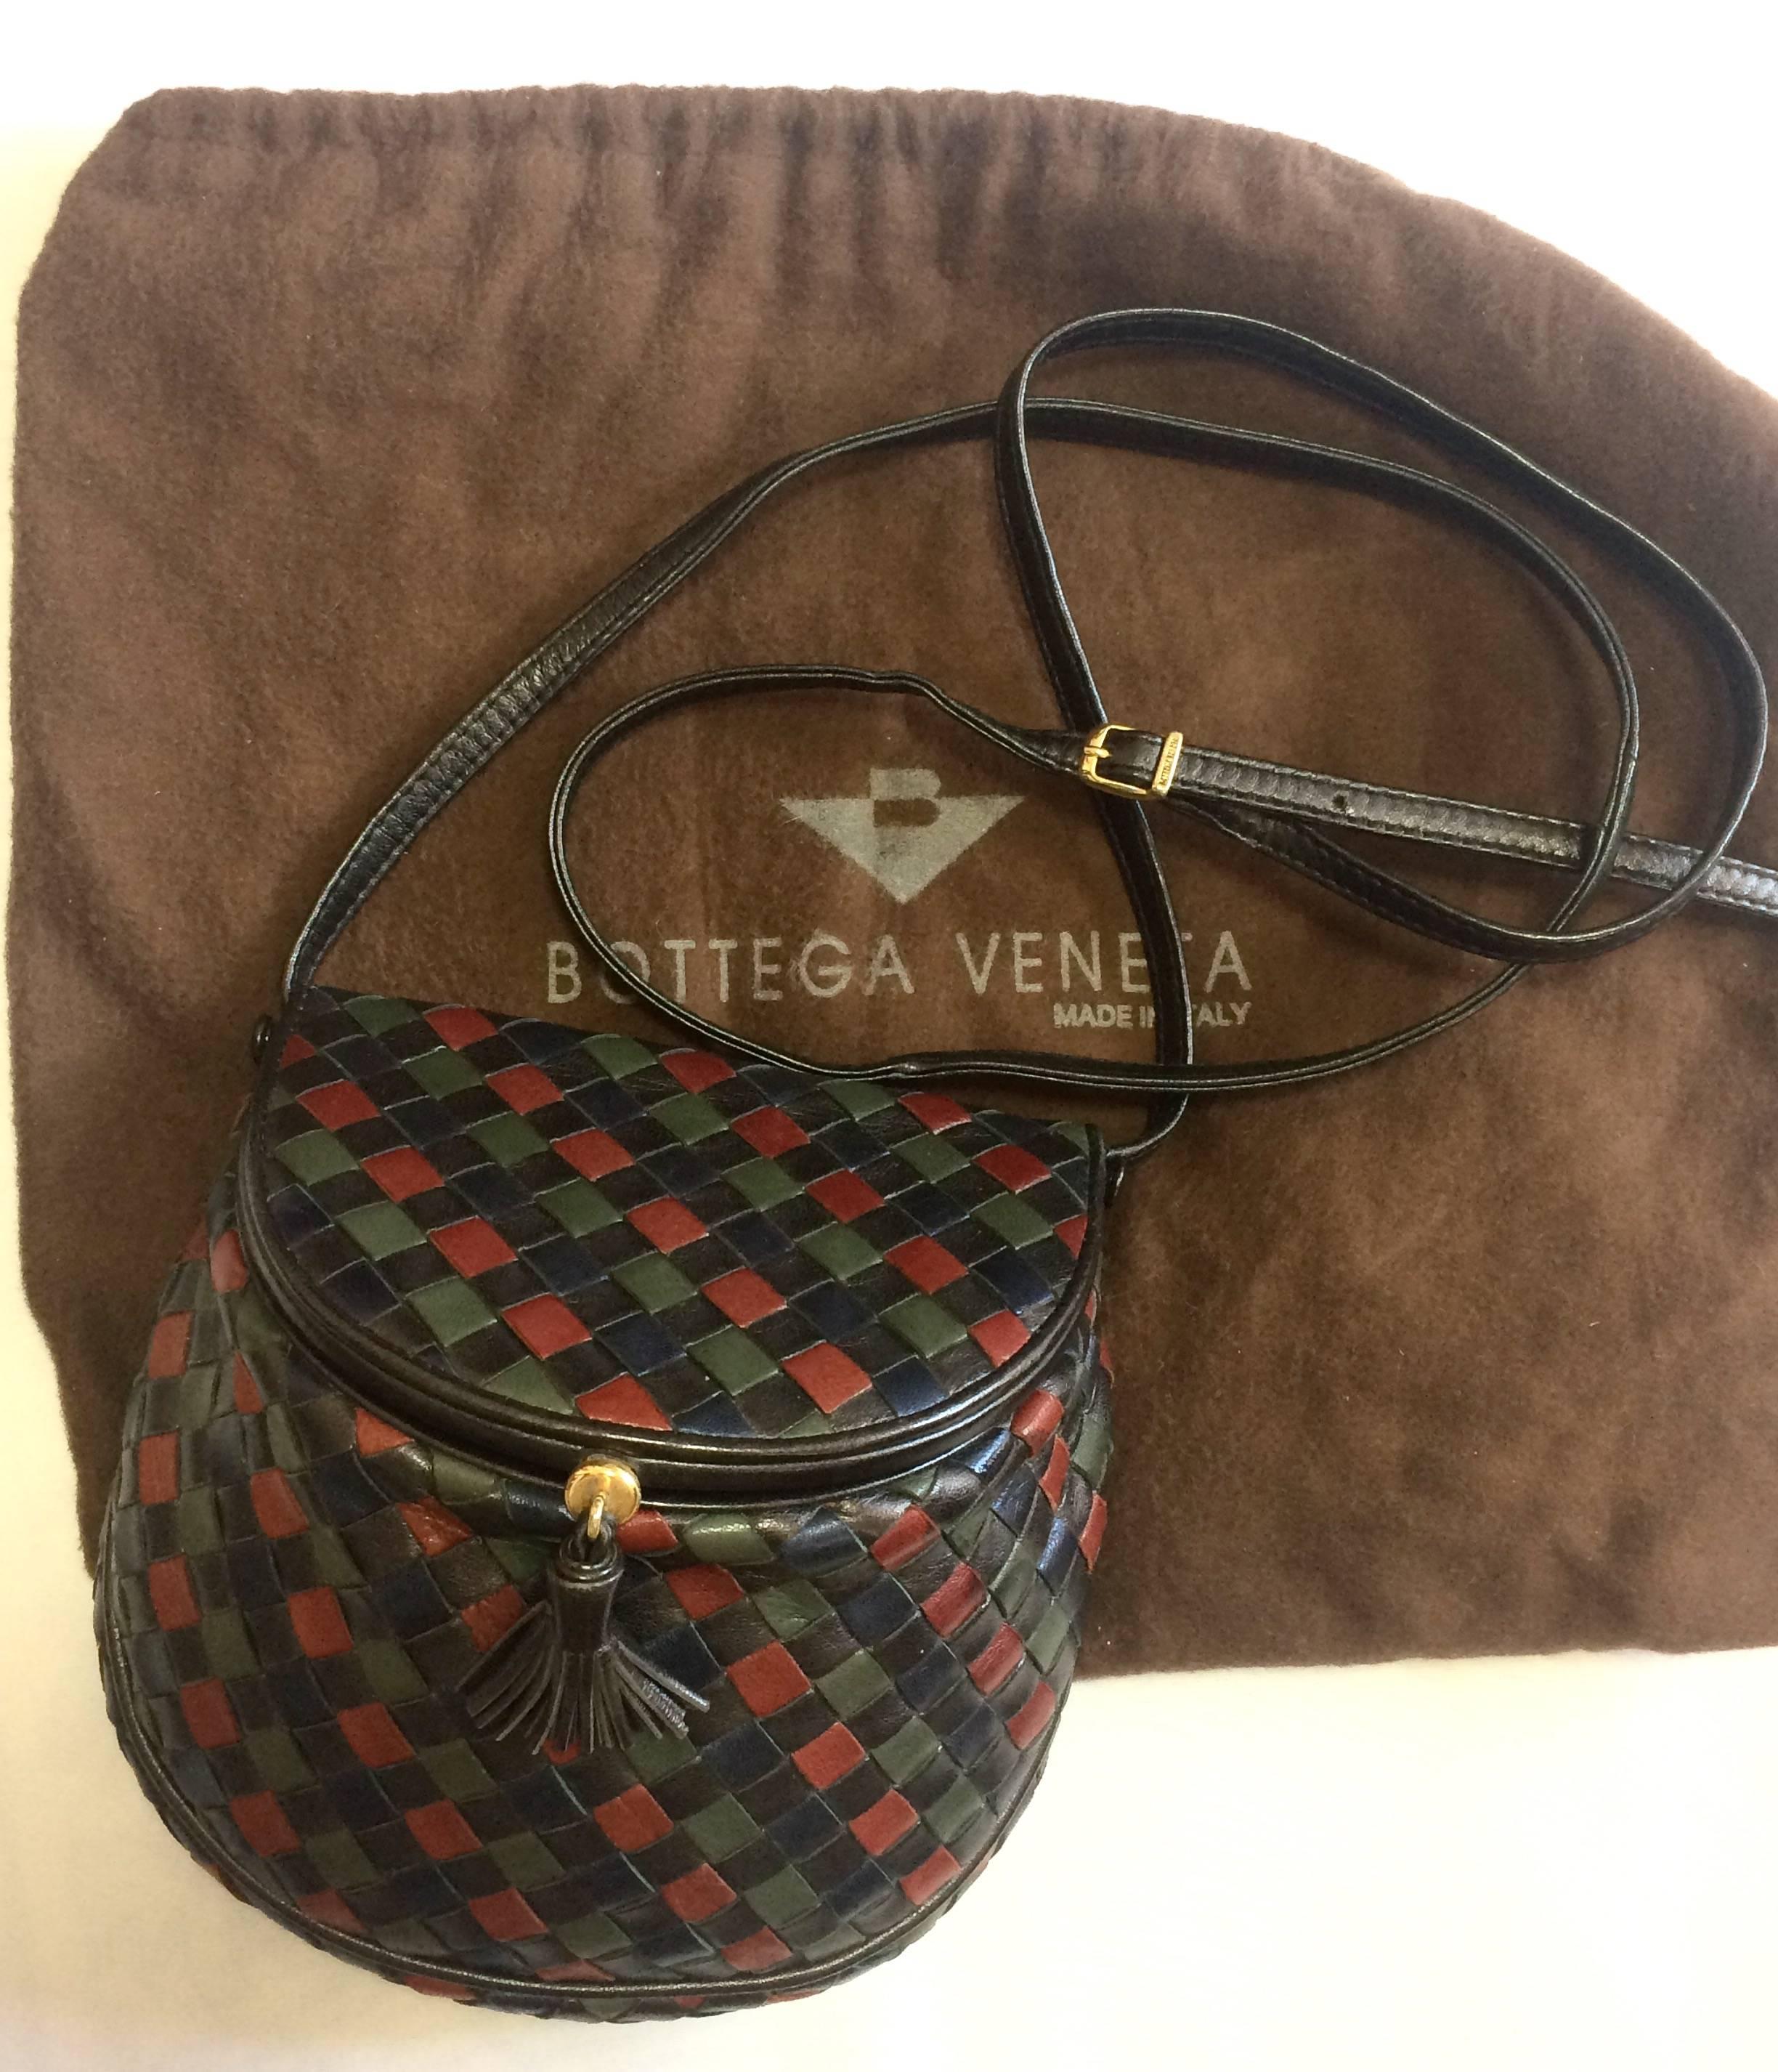 1990s. Vintage Bottega Veneta navy, khaki, wine, brown, and black fisherman style intrecciato shoulder bag with a fringe. Must have unique bag.

Beautiful vintage condition! Must have unique Bottega purse back in the era...

Introducing another